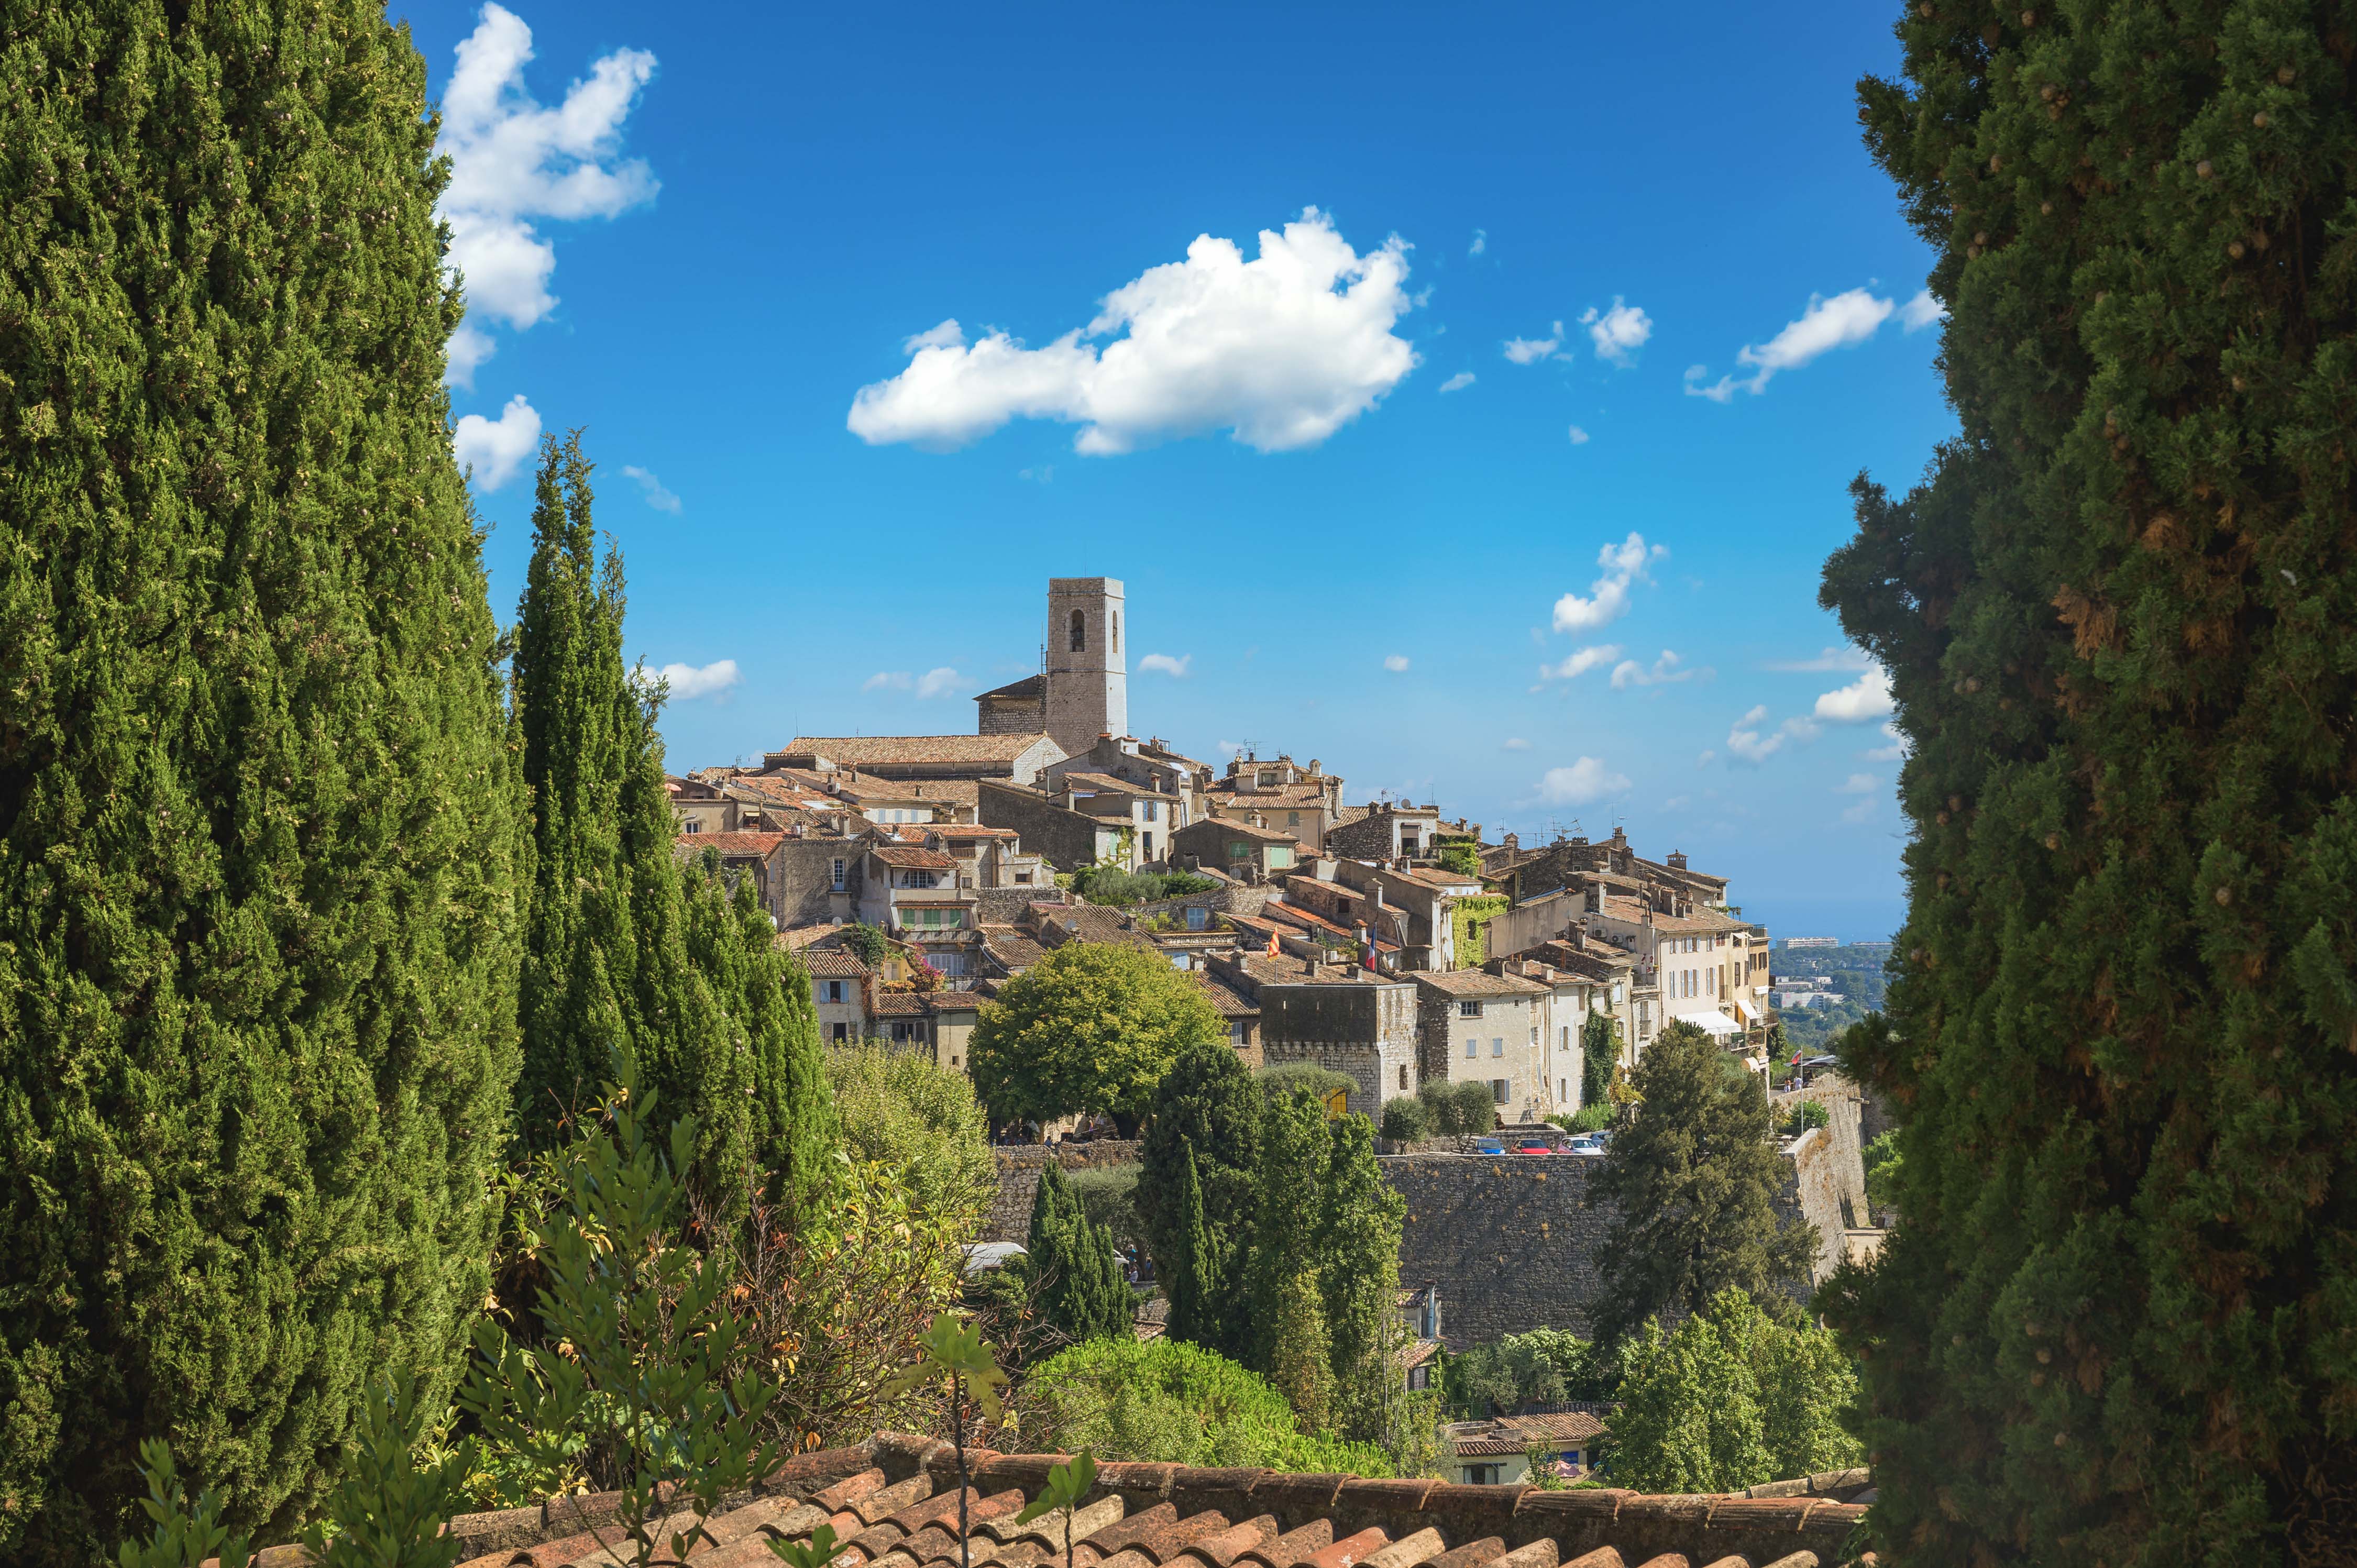 Beautiful medieval architecture of Saint Paul de Vence town in French Riviera, France on a sunny summer day. Image: Shutterstock.